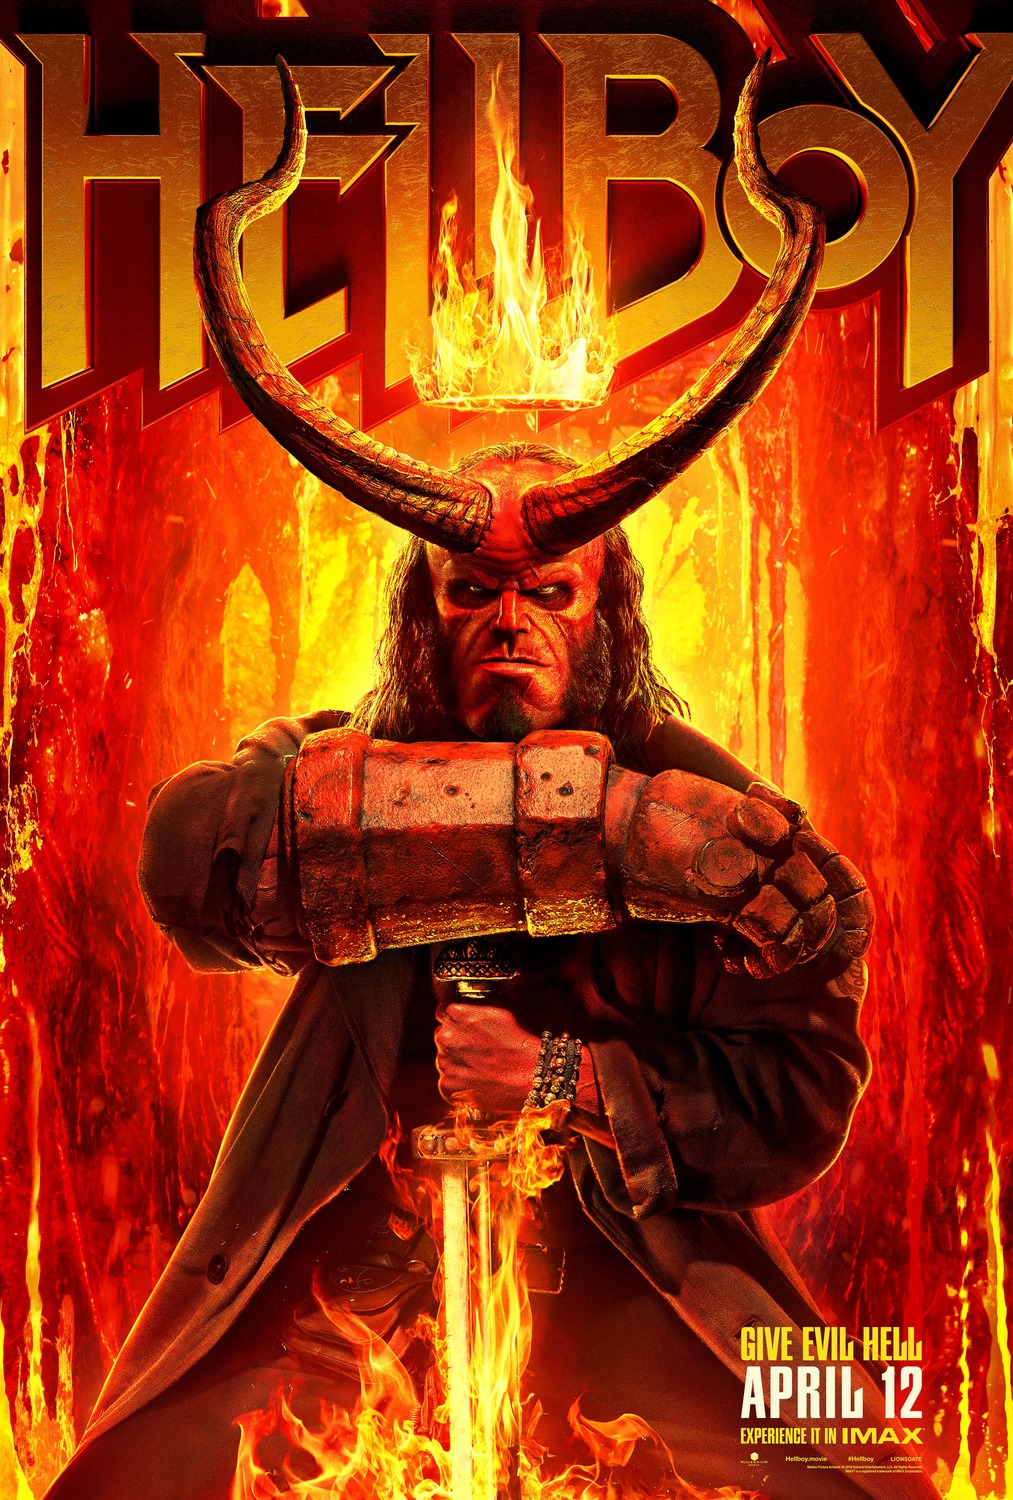 Extra Large Movie Poster Image for Hellboy (#7 of 26)